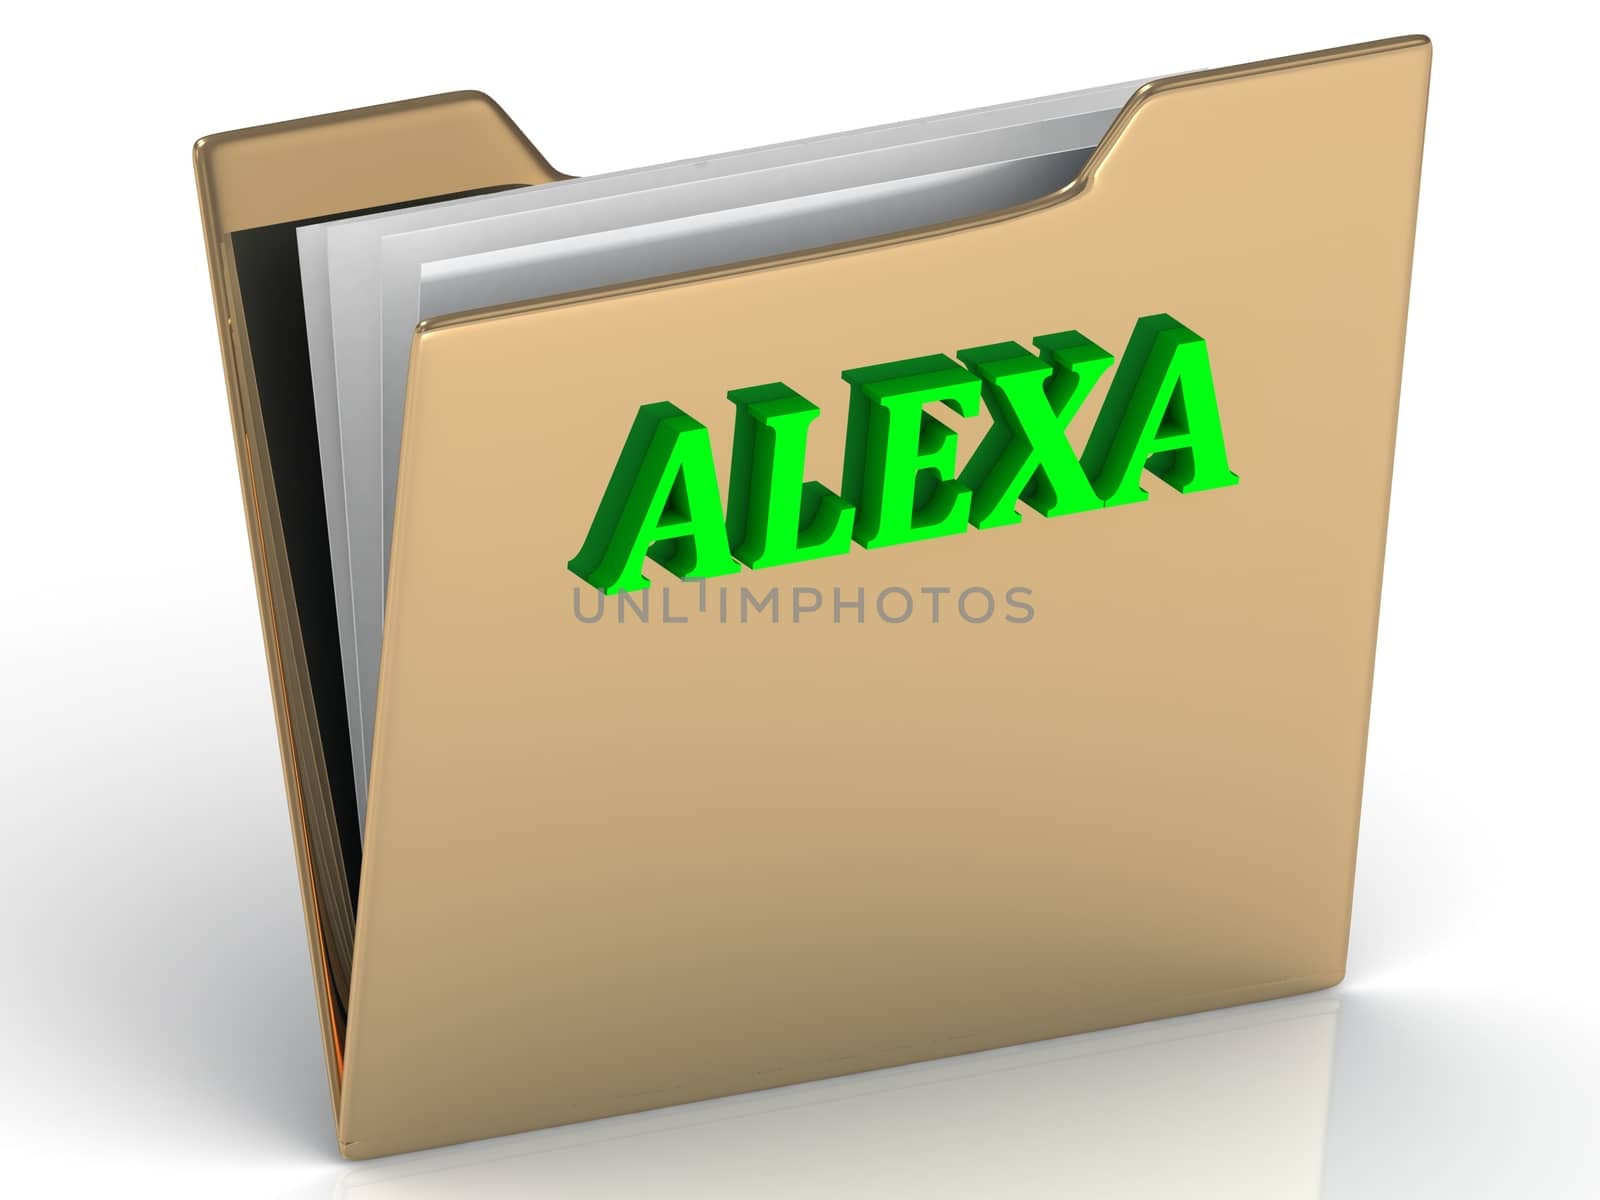 ALEXA- bright green letters on gold paperwork folder on a white background